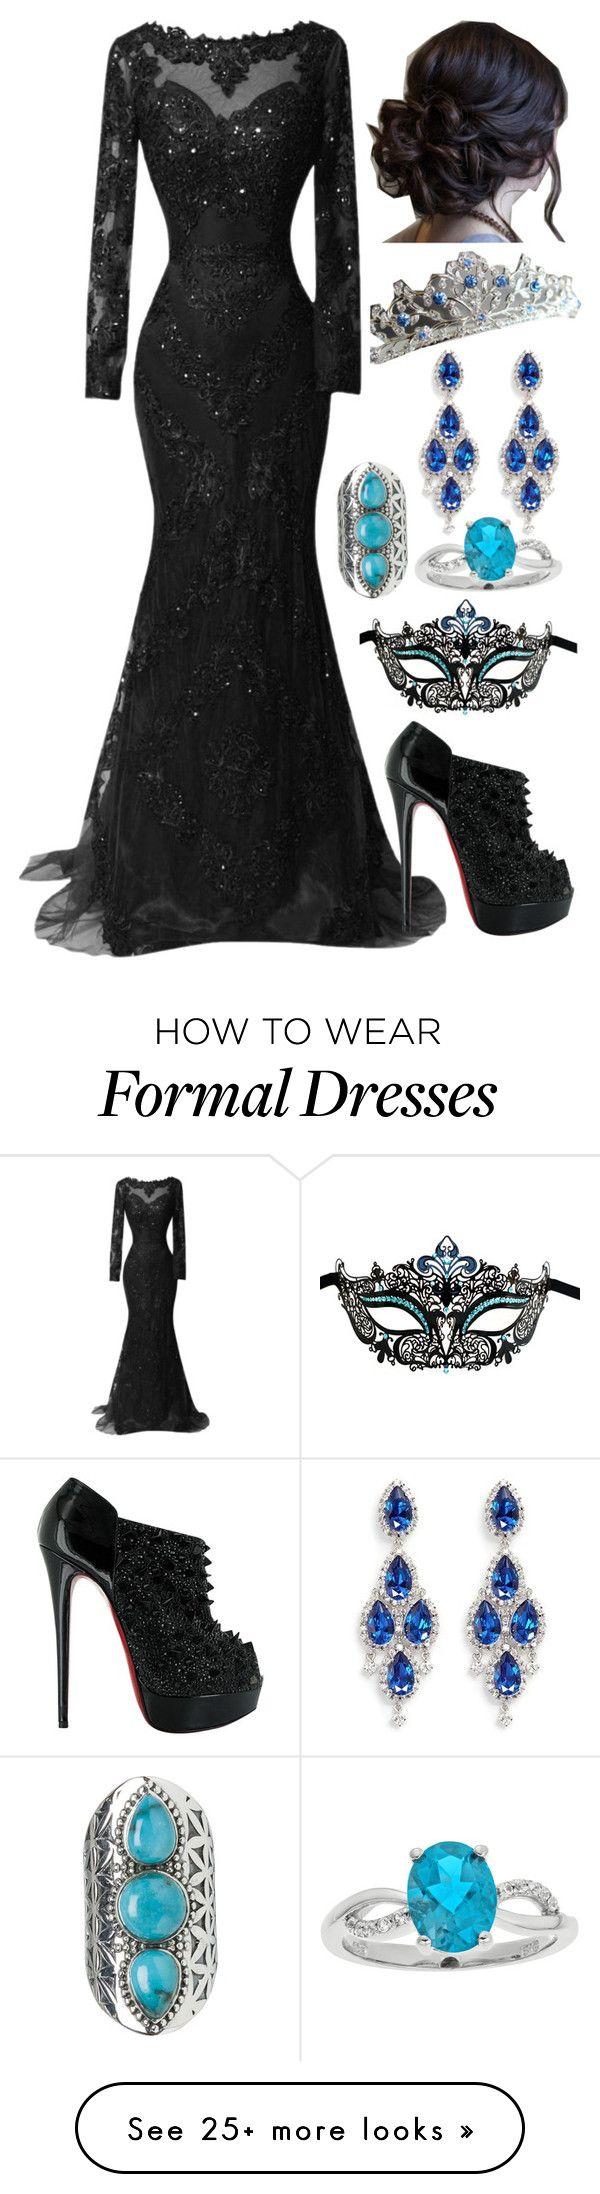 Wedding - Formal Dress Outfits